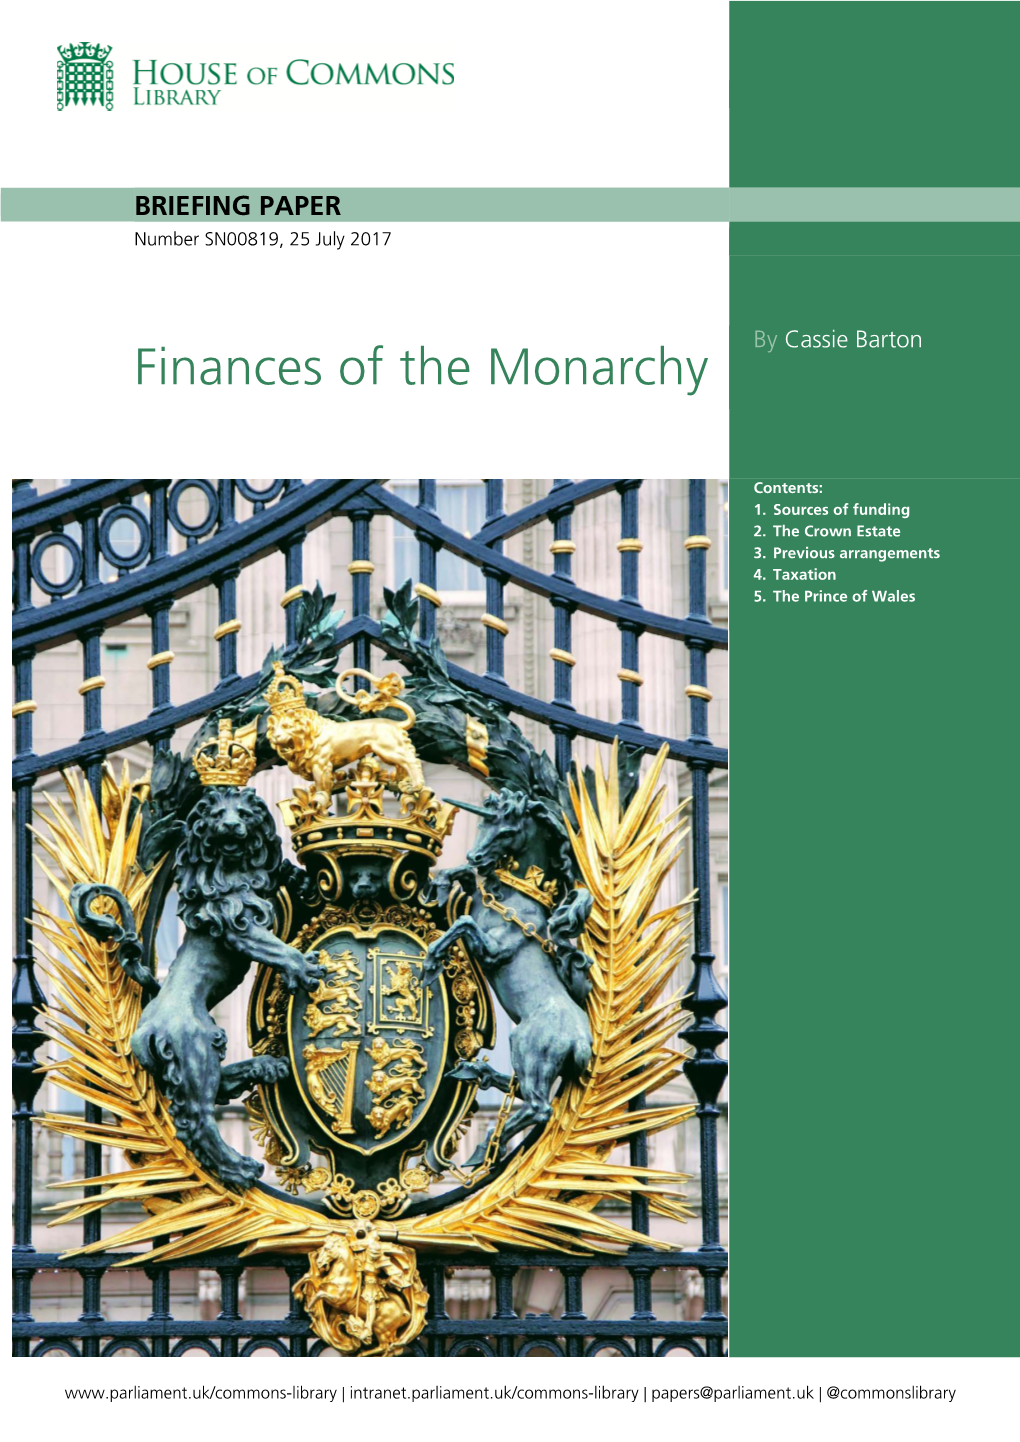 Finances of the Monarchy